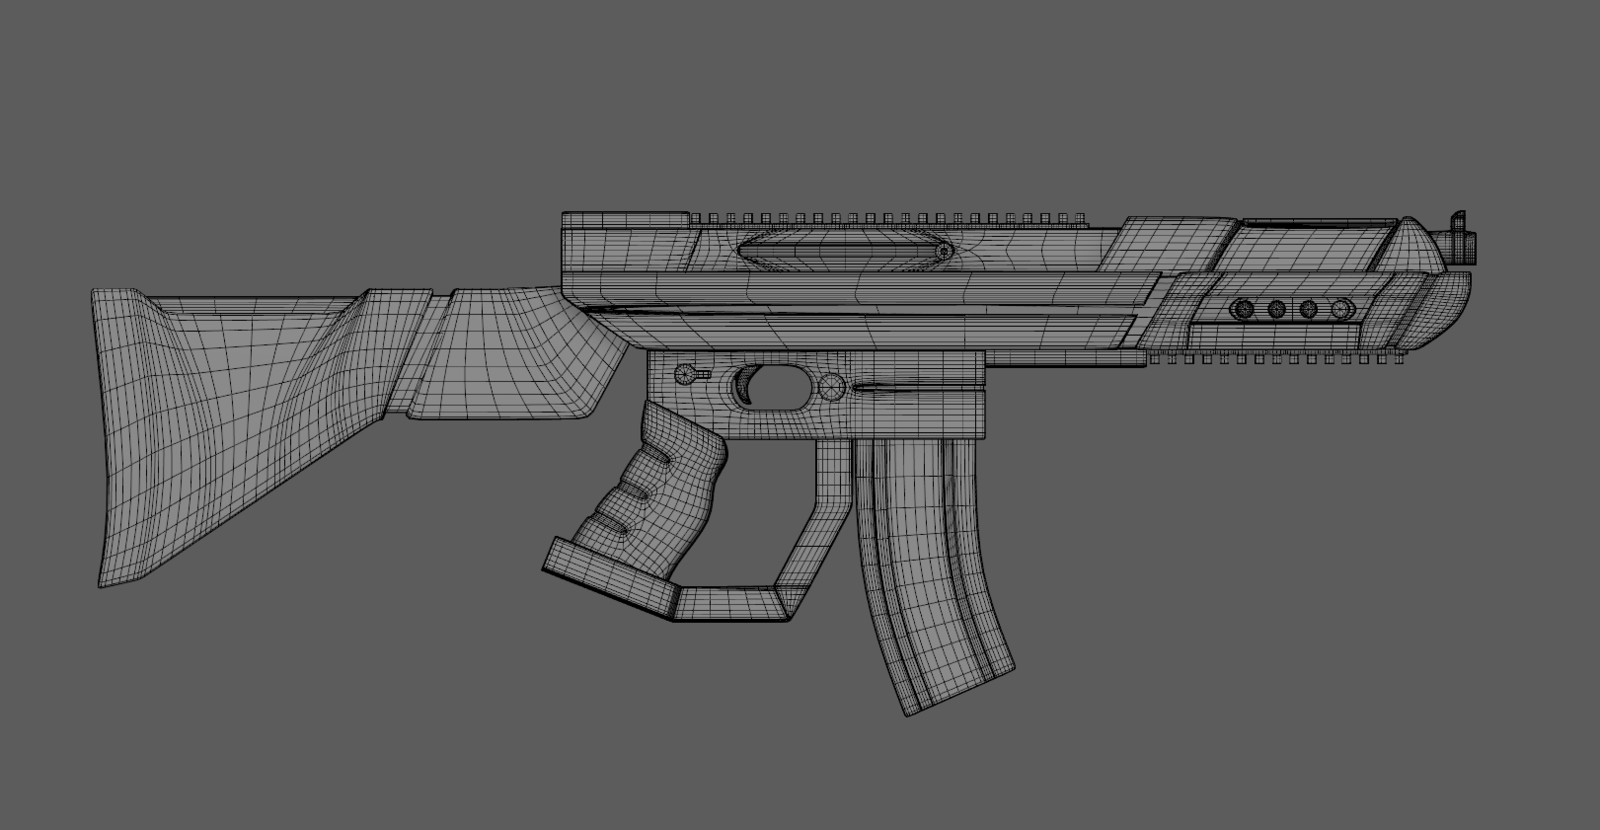 Wireframe of completed rifle model